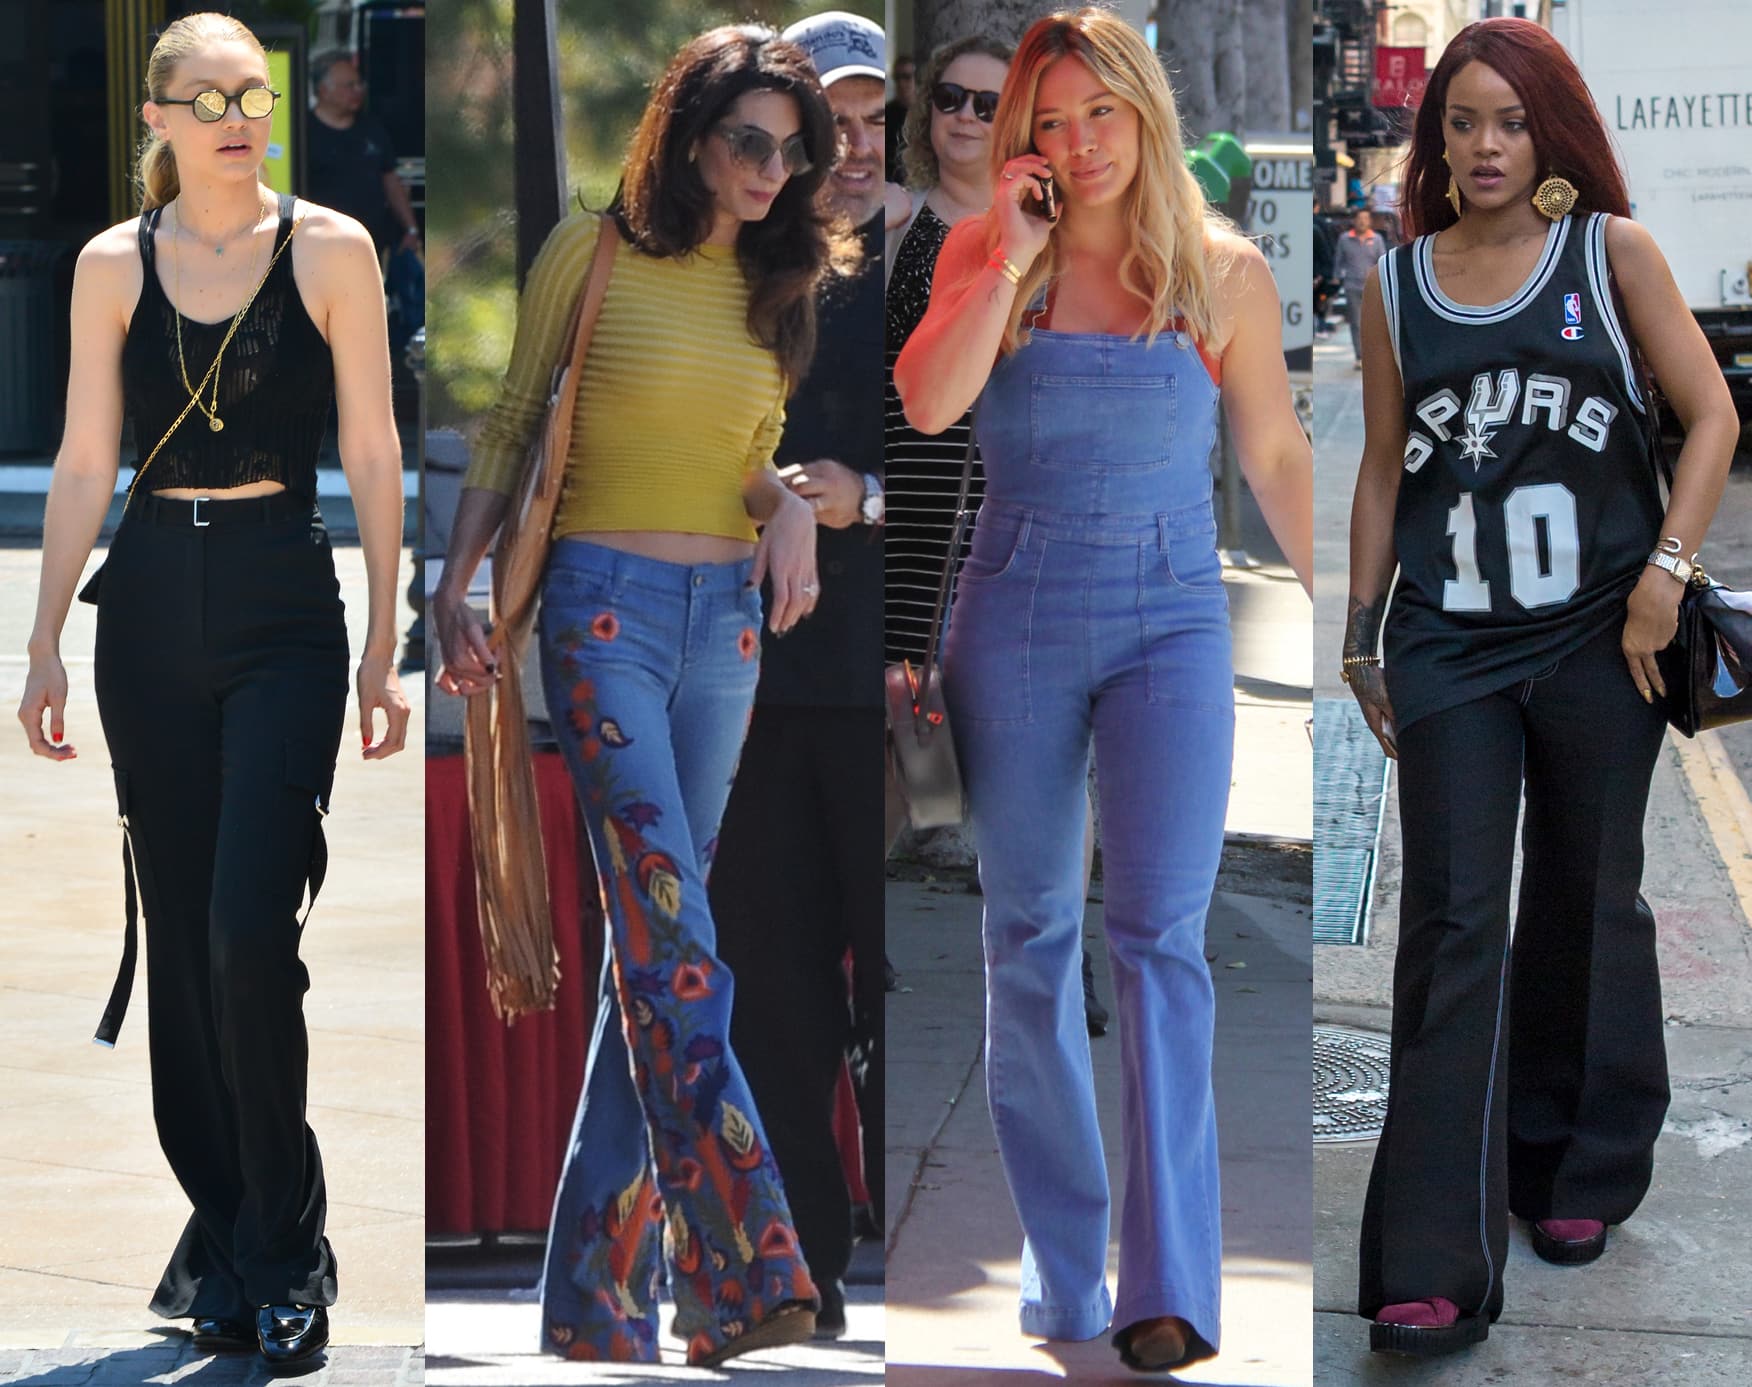 Gigi Hadid, Amal Alamuddin, Hilary Duff, and Rihanna show how they style their flared or bell-bottom jeans